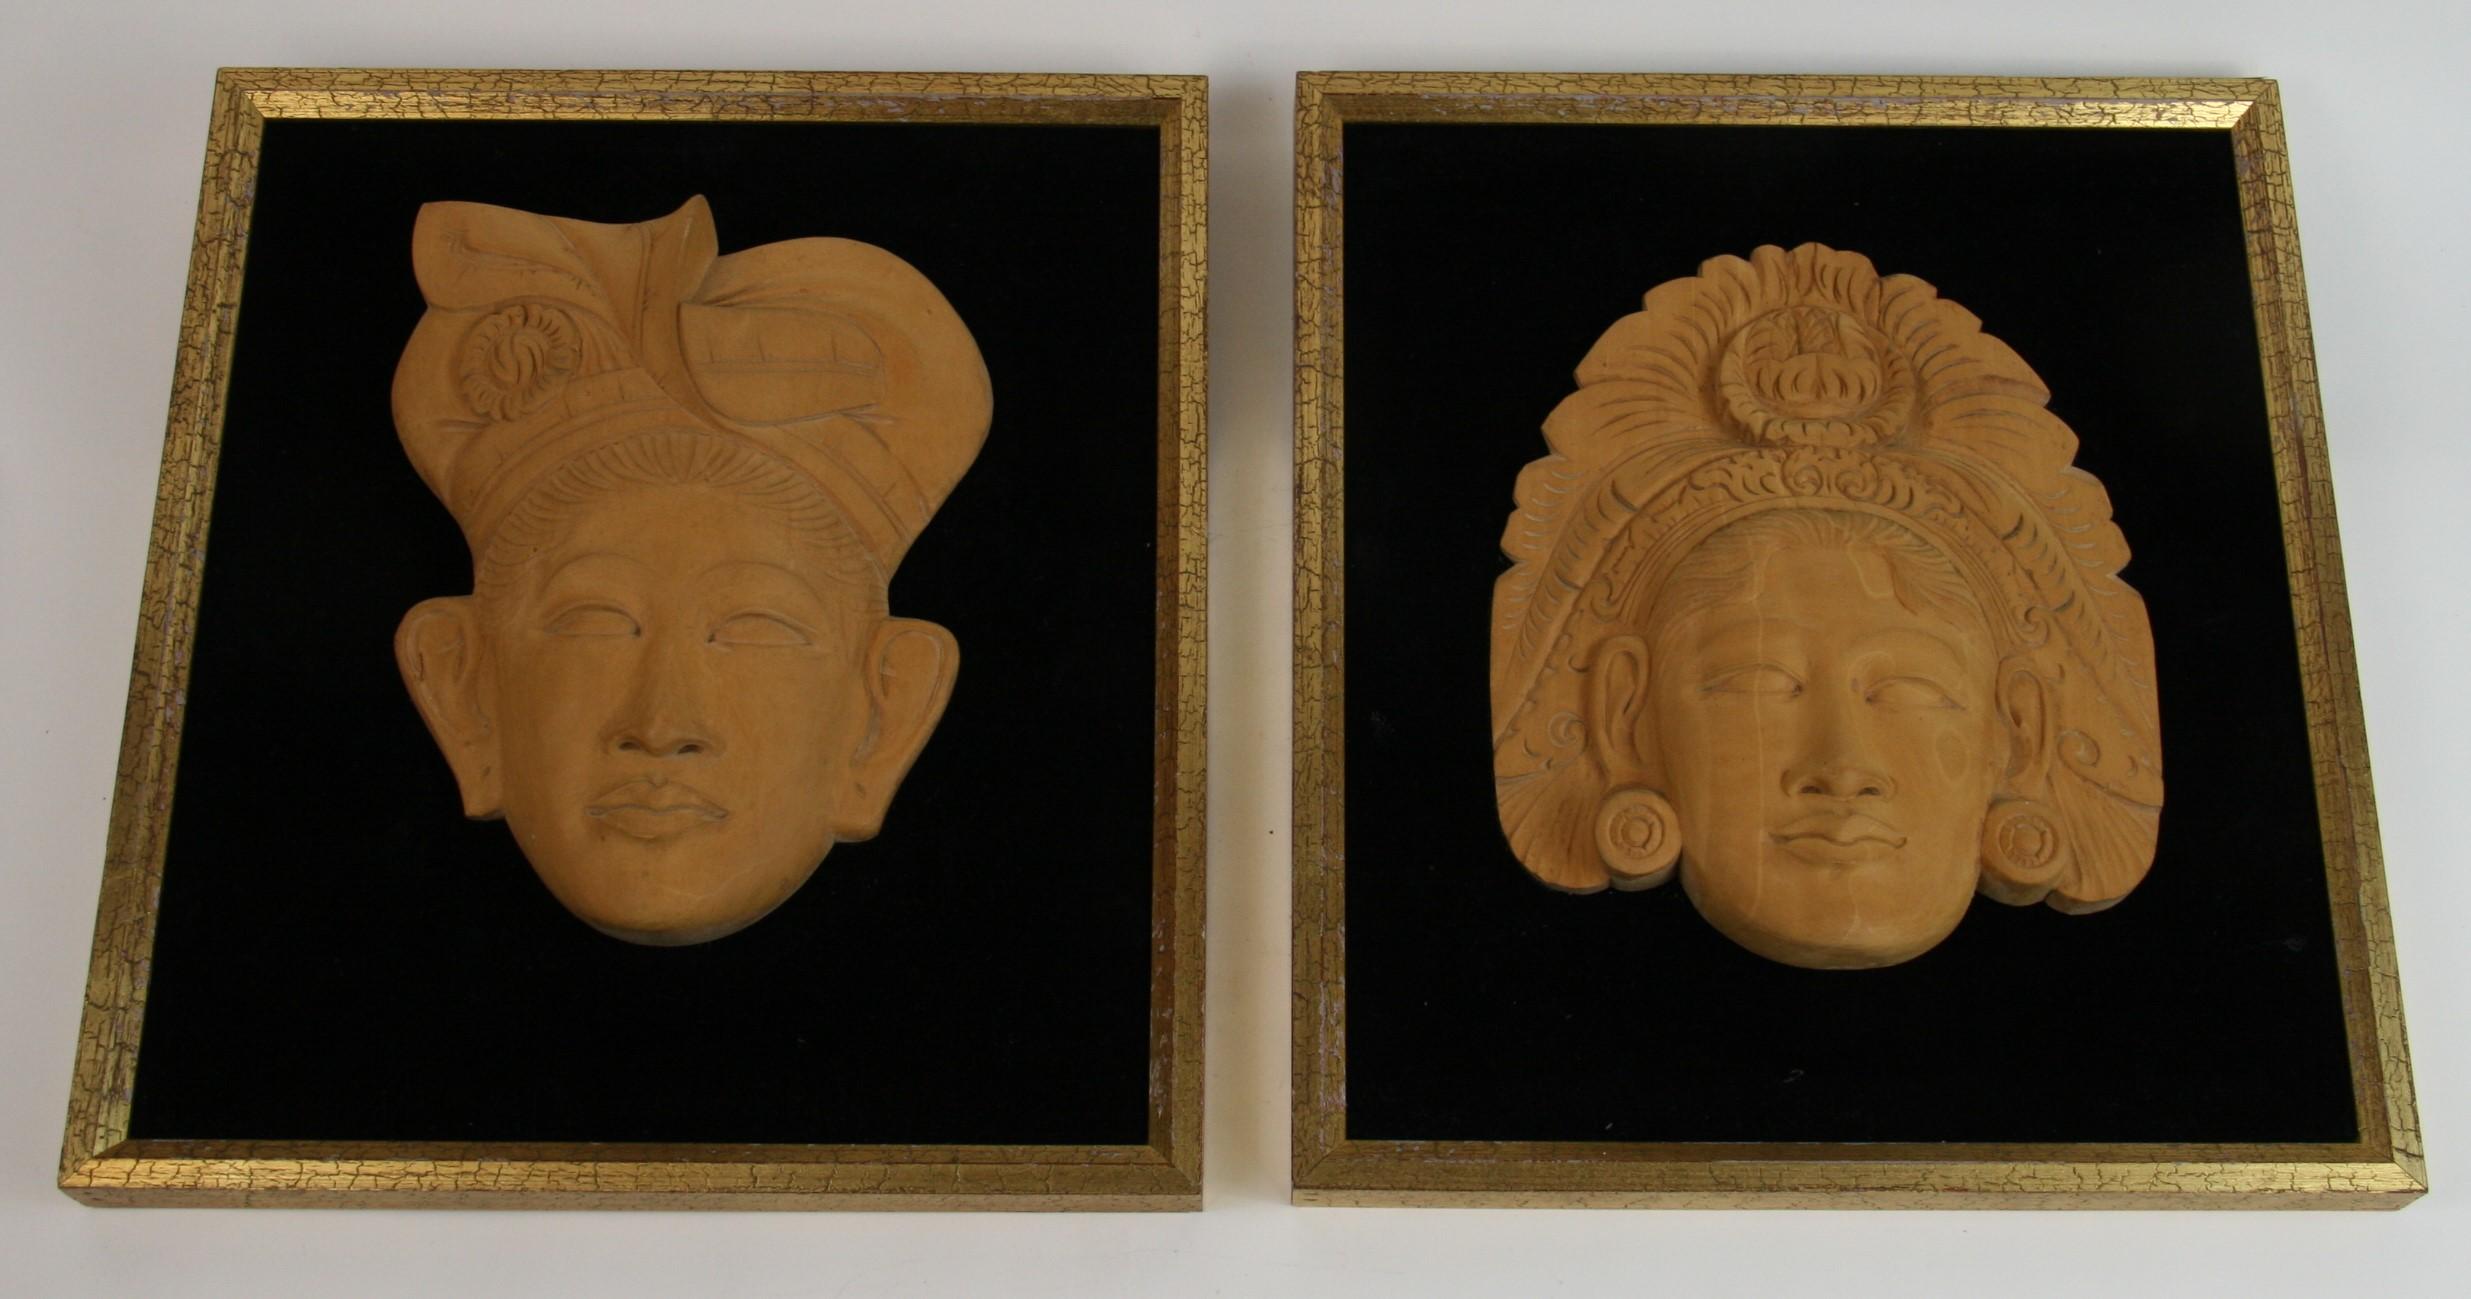 Unknown Figurative Sculpture - Pair of  Wood Figural Carvings Mounted in Frames 